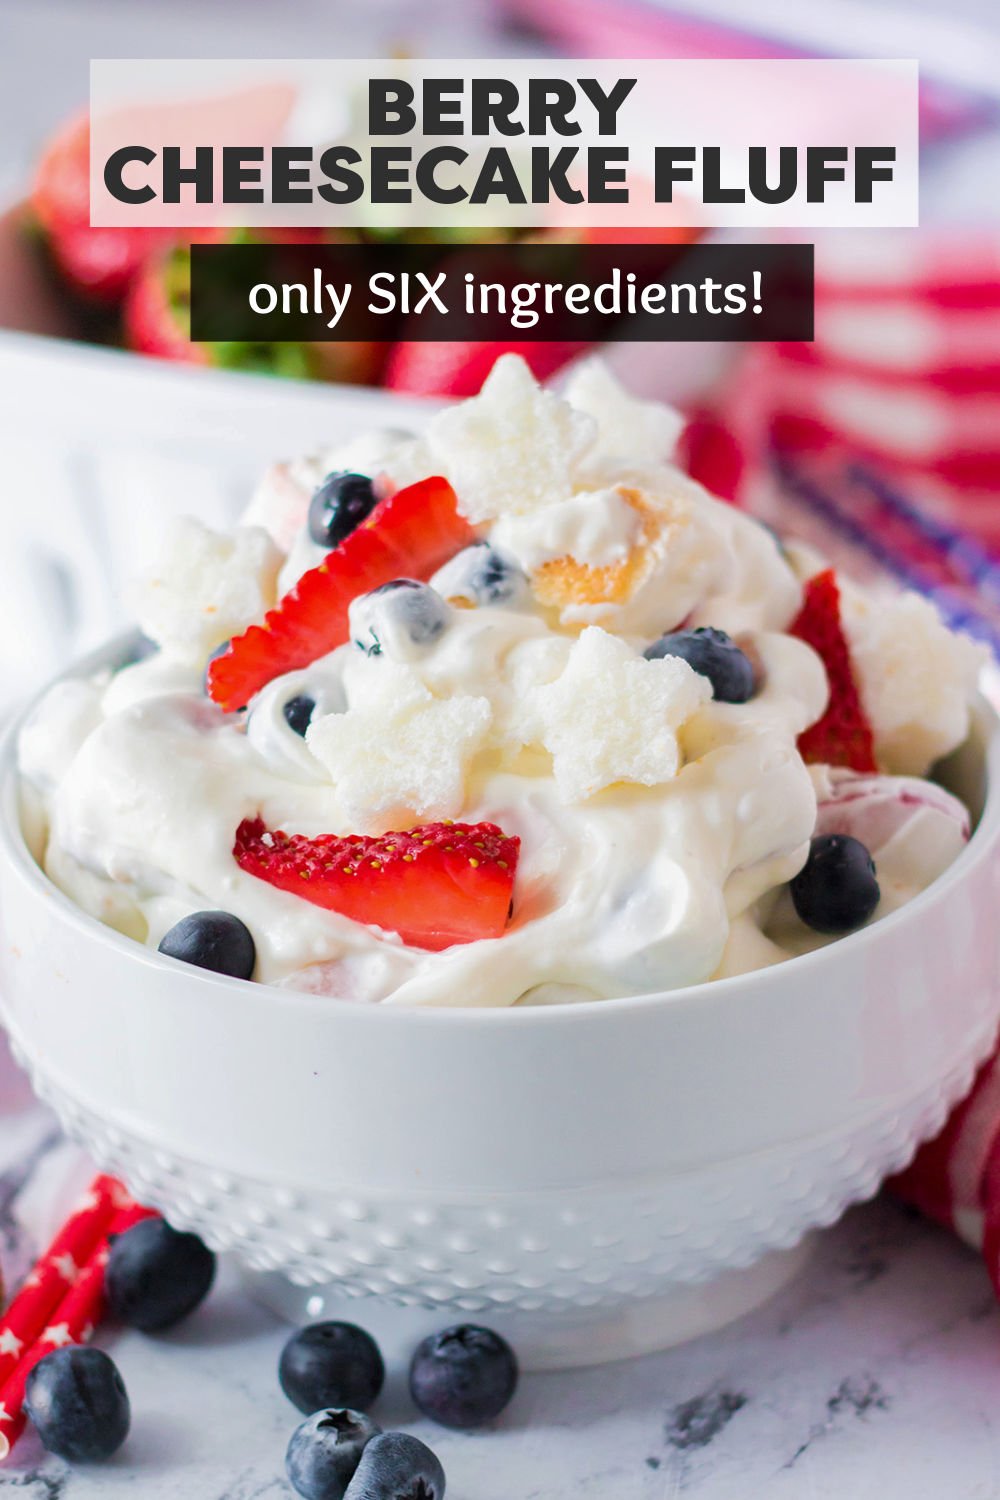 Easy Berry Cheesecake Fluff (sometimes called "fluff salad") is loaded with cream cheese, homemade whipped cream, fresh berries, and chunks of angel food cake. It is full of cheesecake flavor, takes only minutes to prepare, and is a hit at any party! | www.persnicketyplates.com